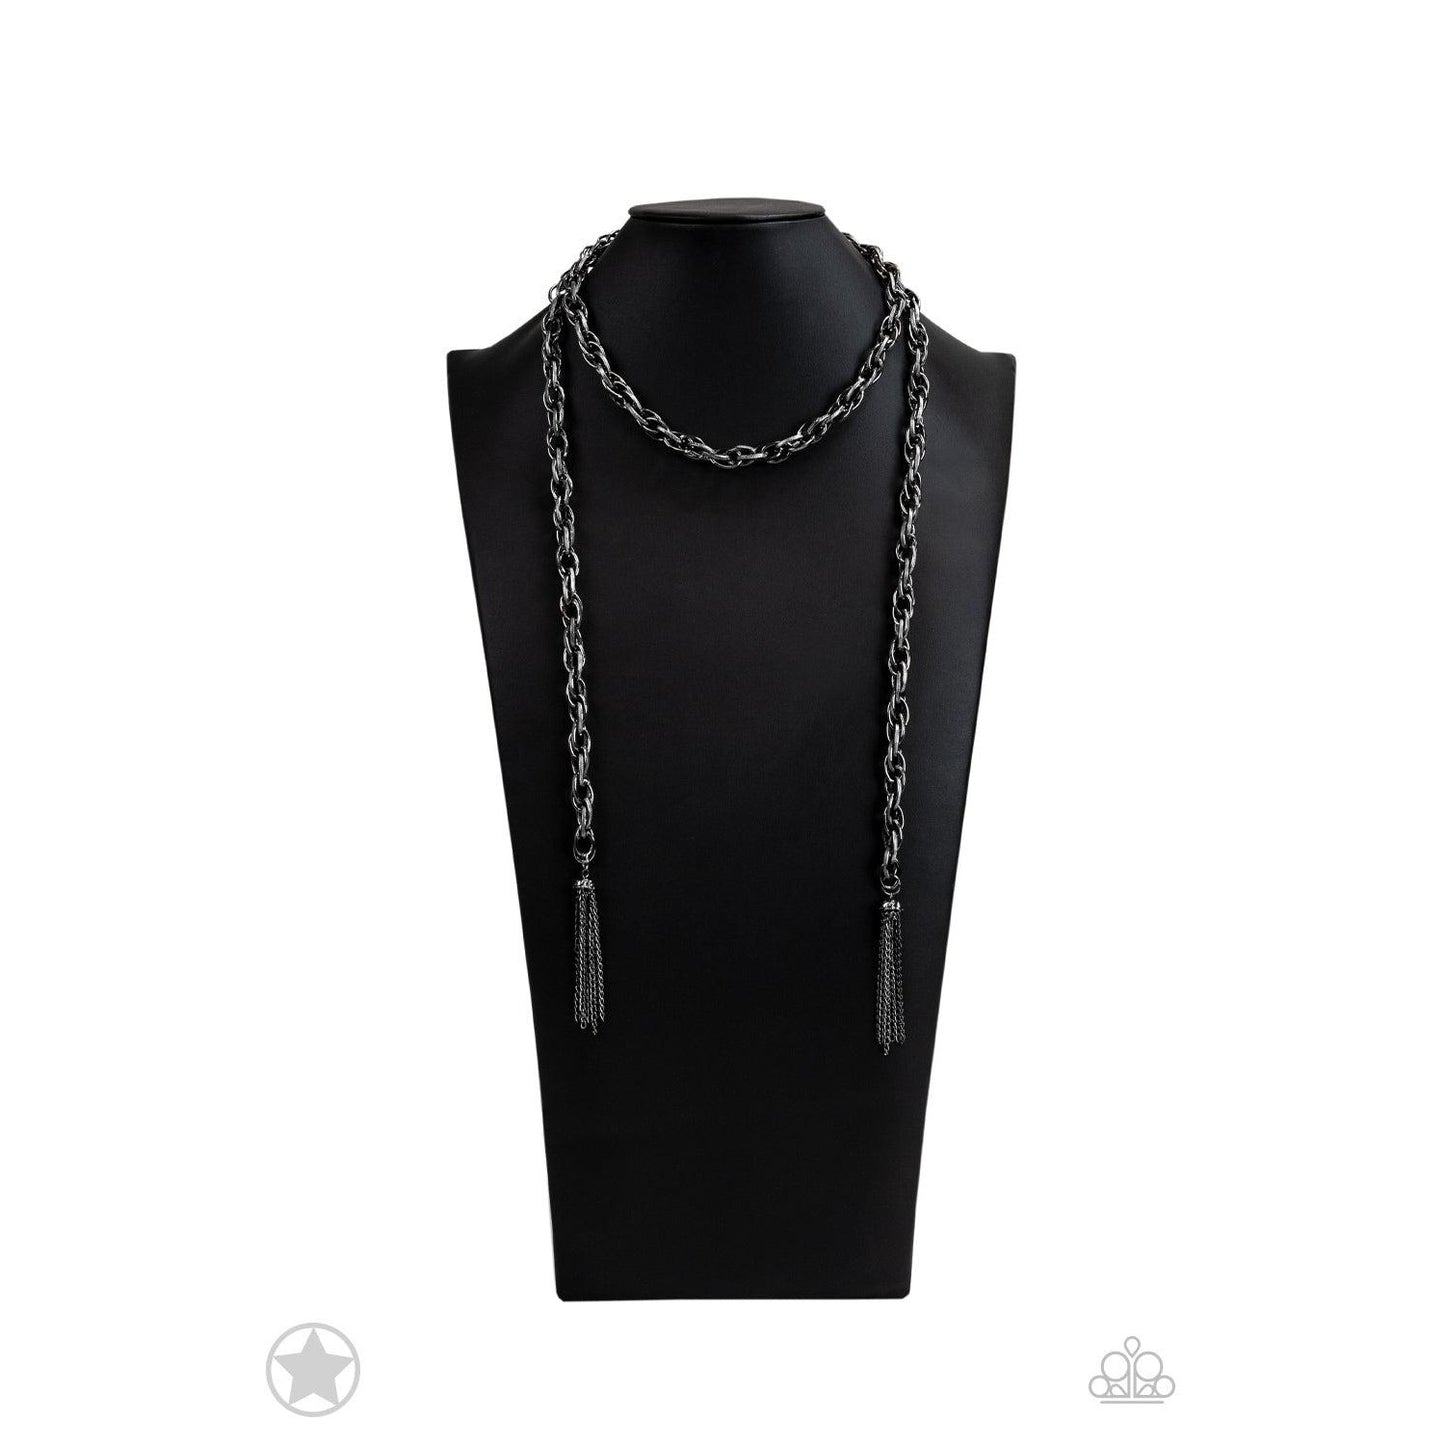 SCARFed for Attention - Black Blockbuster Necklace - A Large Selection Hand-Chains And Jewelry On rainbowartsreview,Women's Jewelry | Necklaces, Earrings, Bracelets